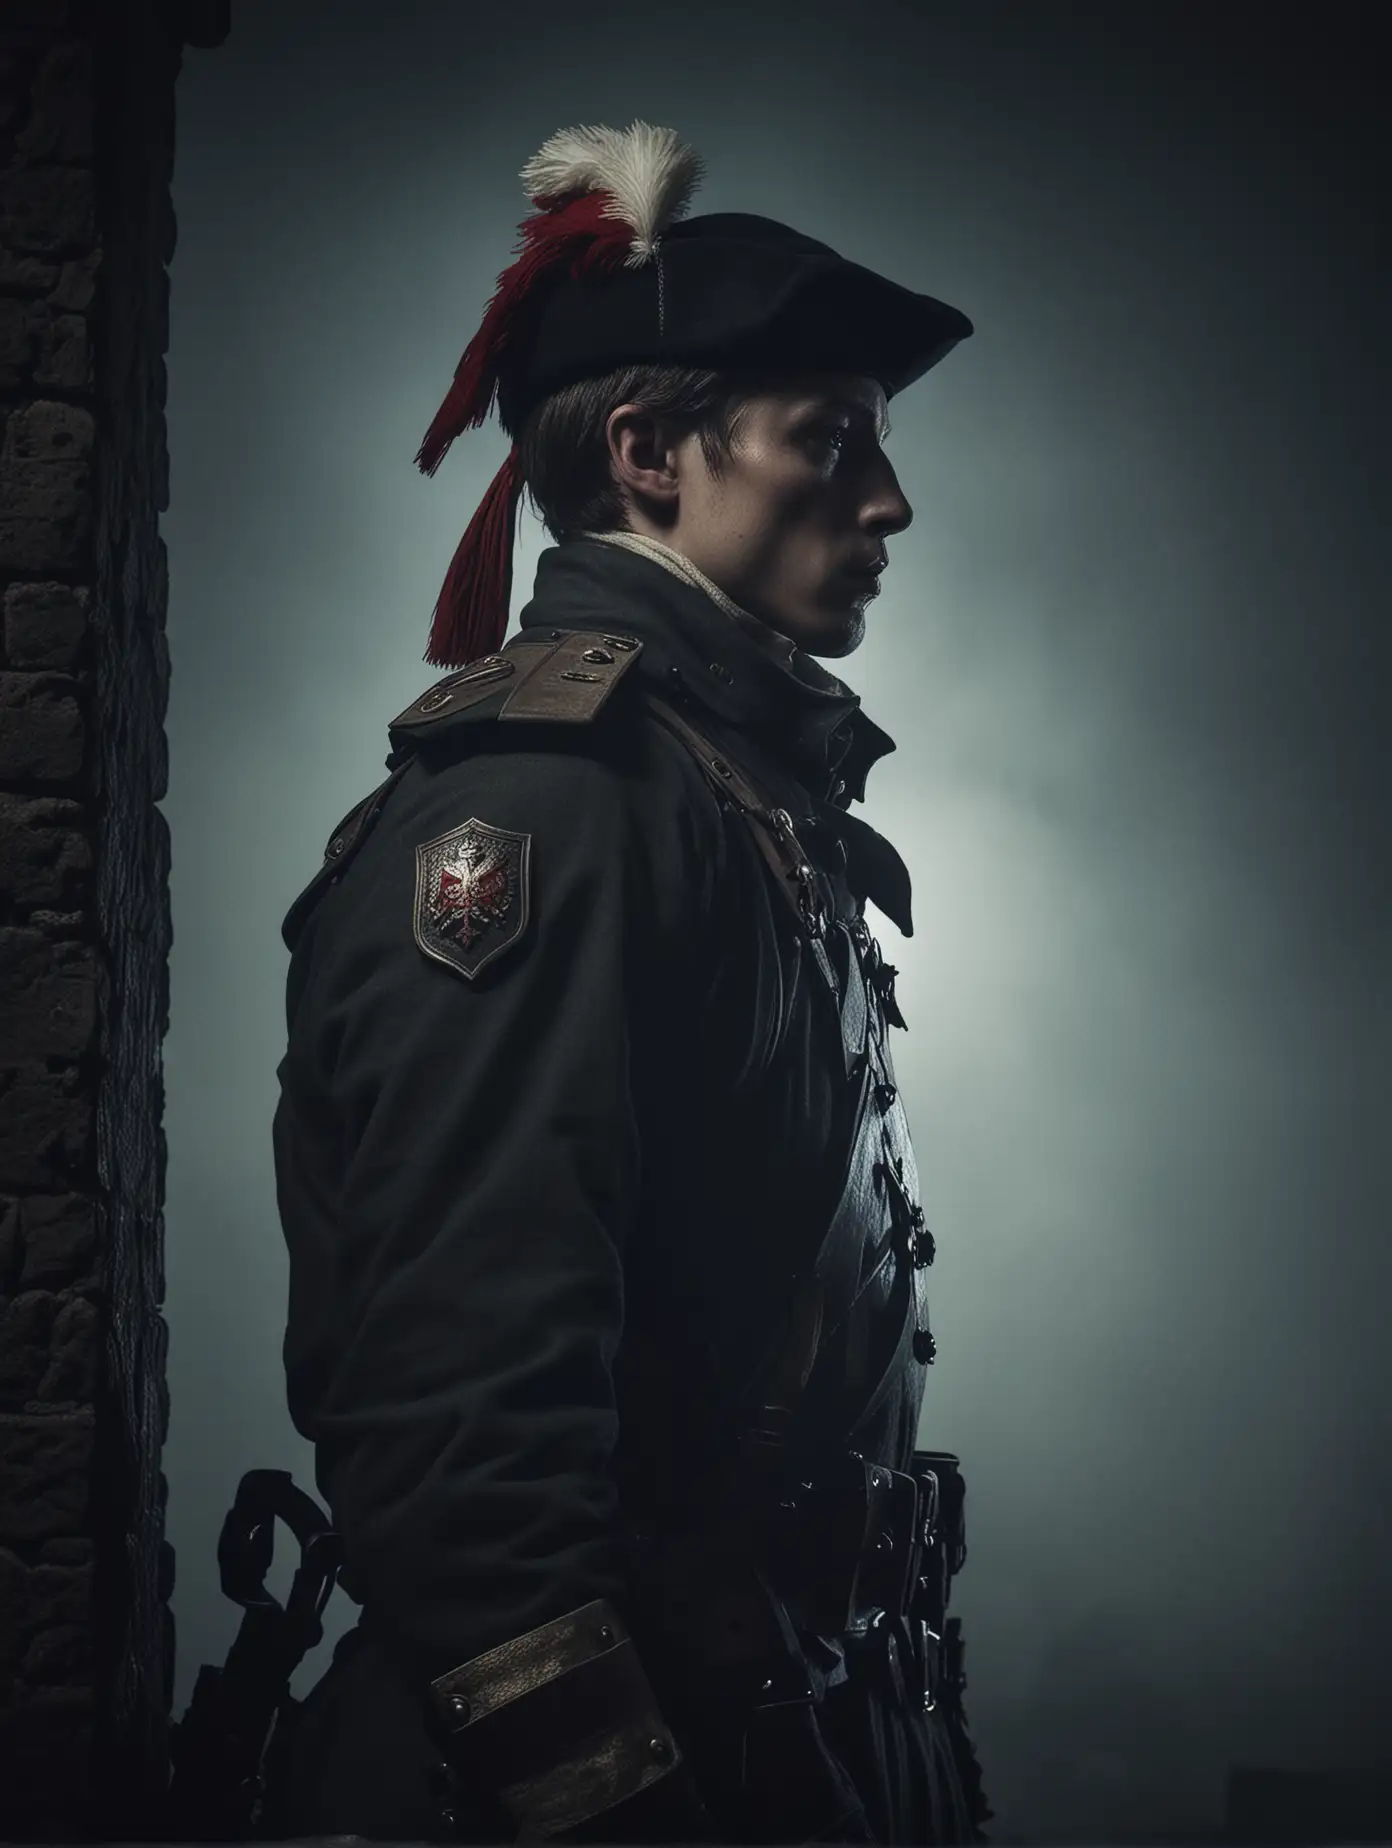 Epic-17th-Century-Polish-Soldier-Guarding-Fortress-Tower-at-Night